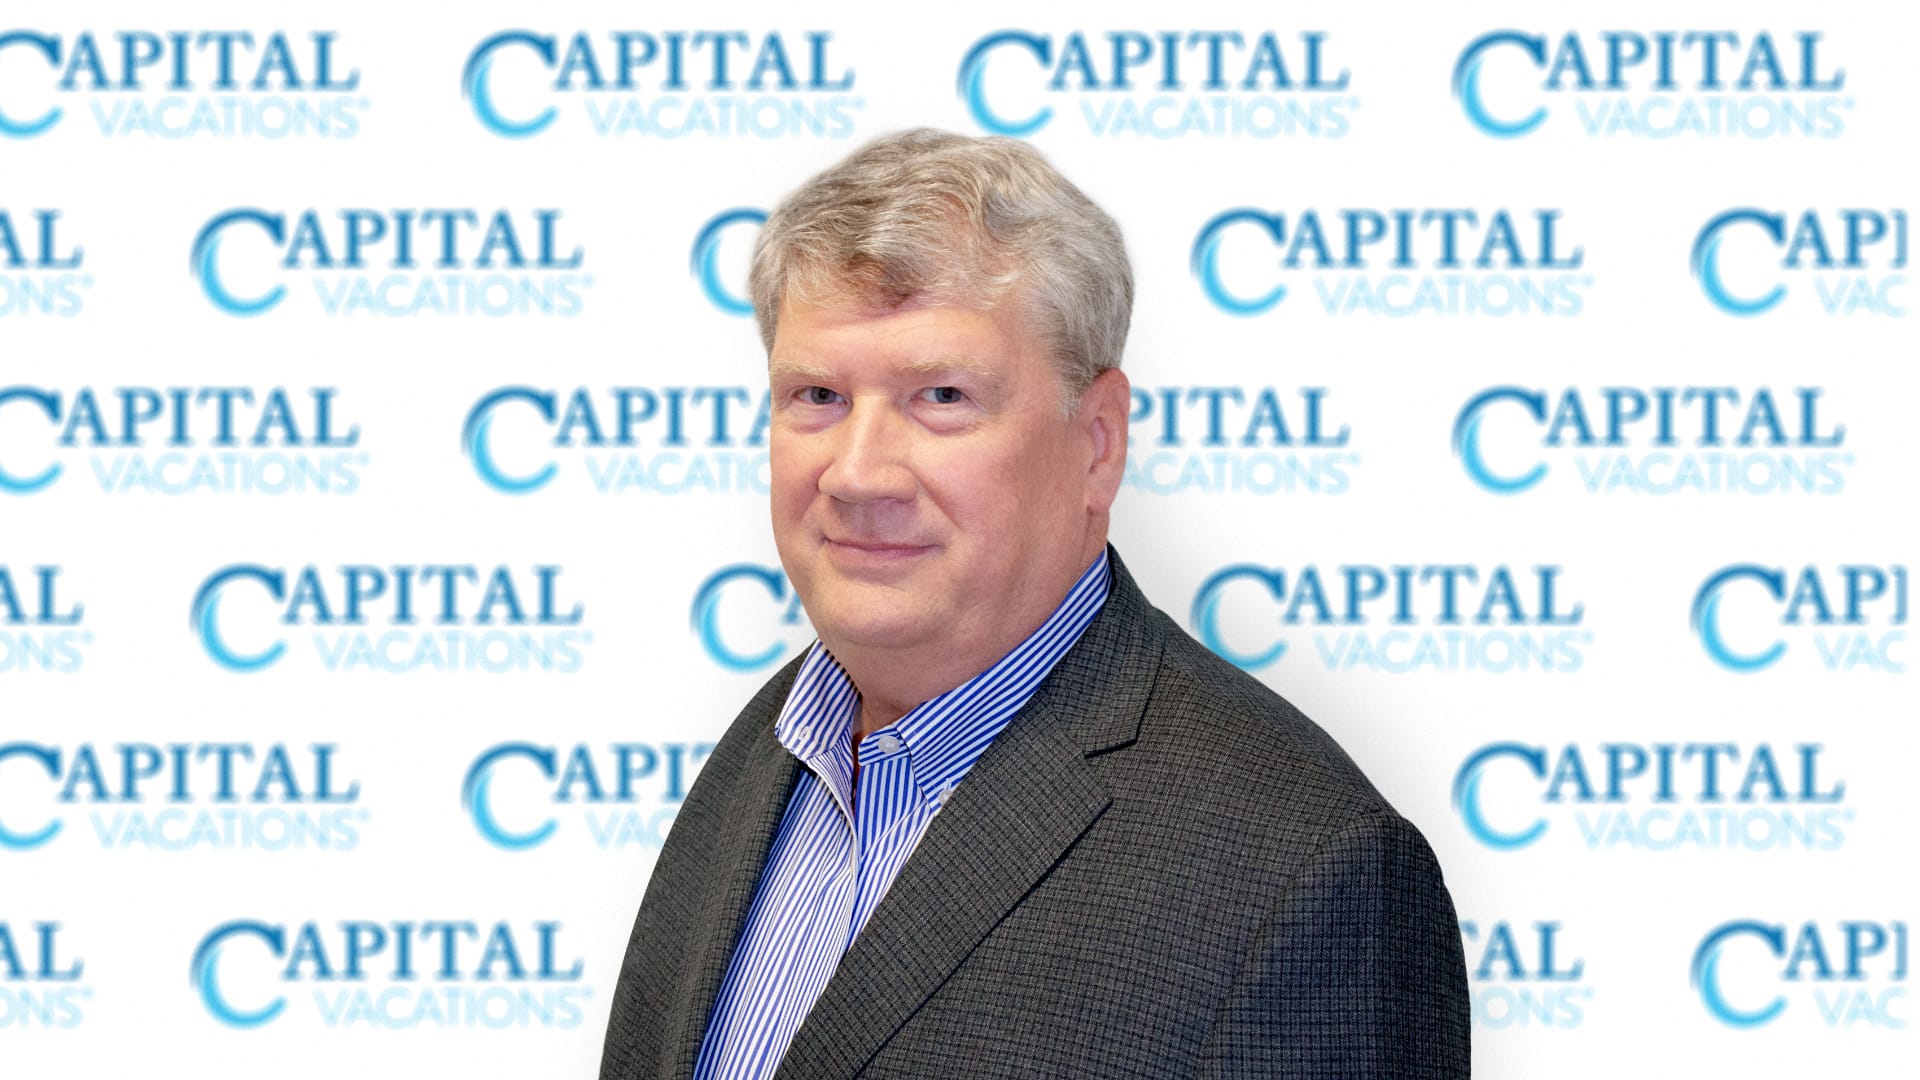 Capital Vacations® Names Jerold L. Rexroad  as Chief Financial Officer